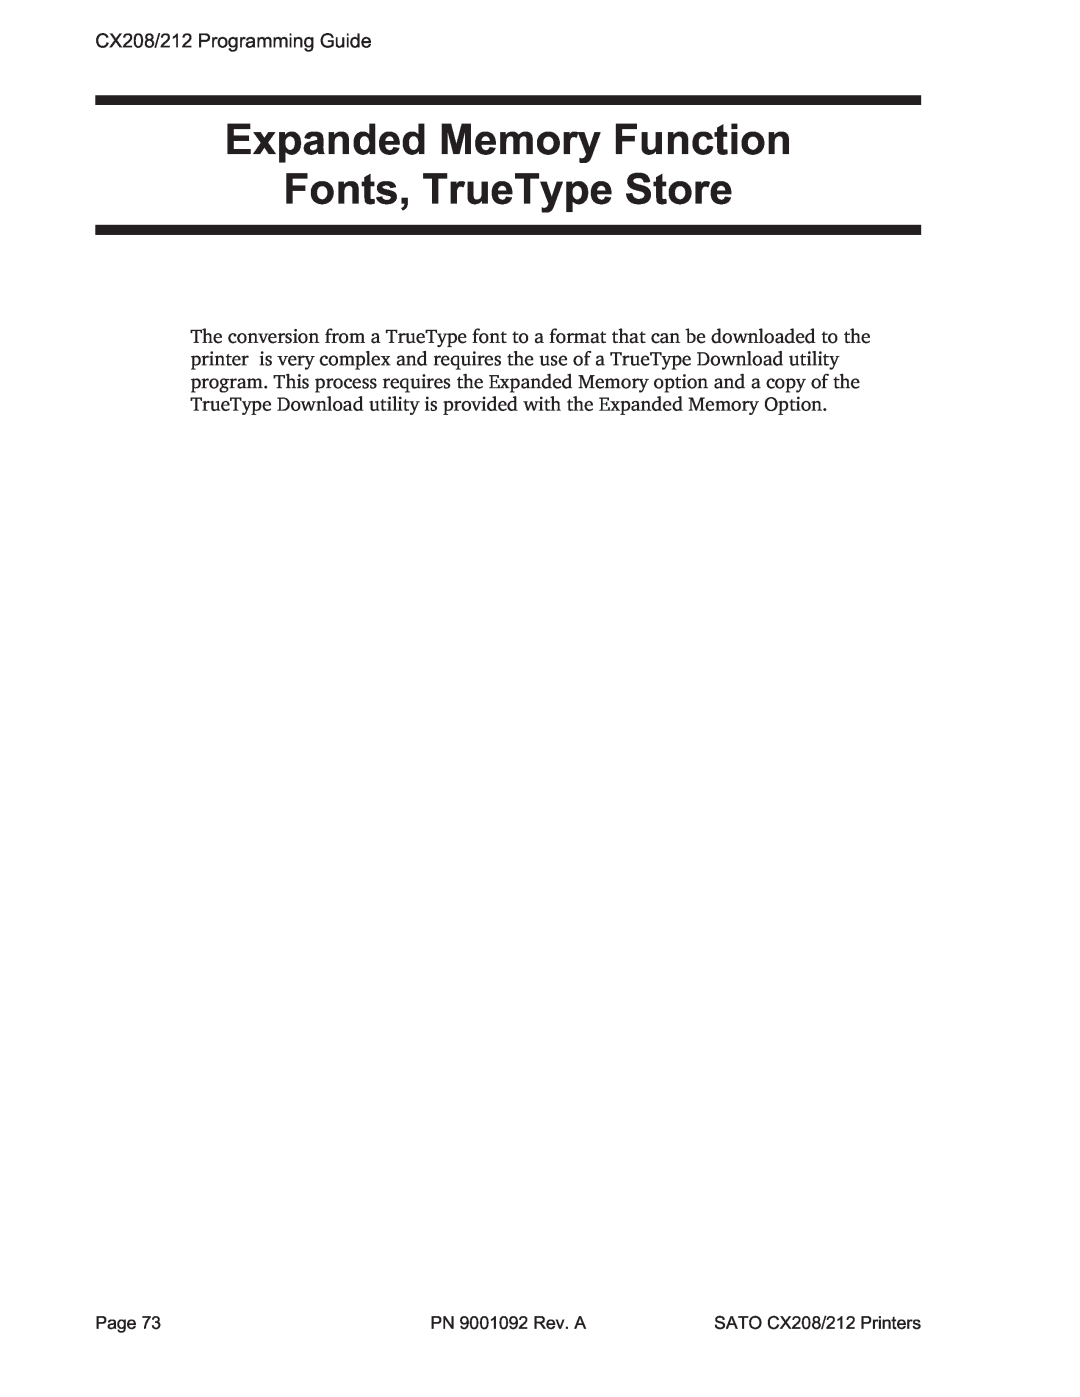 SATO CX208/212 manual Expanded Memory Function Fonts, TrueType Store 